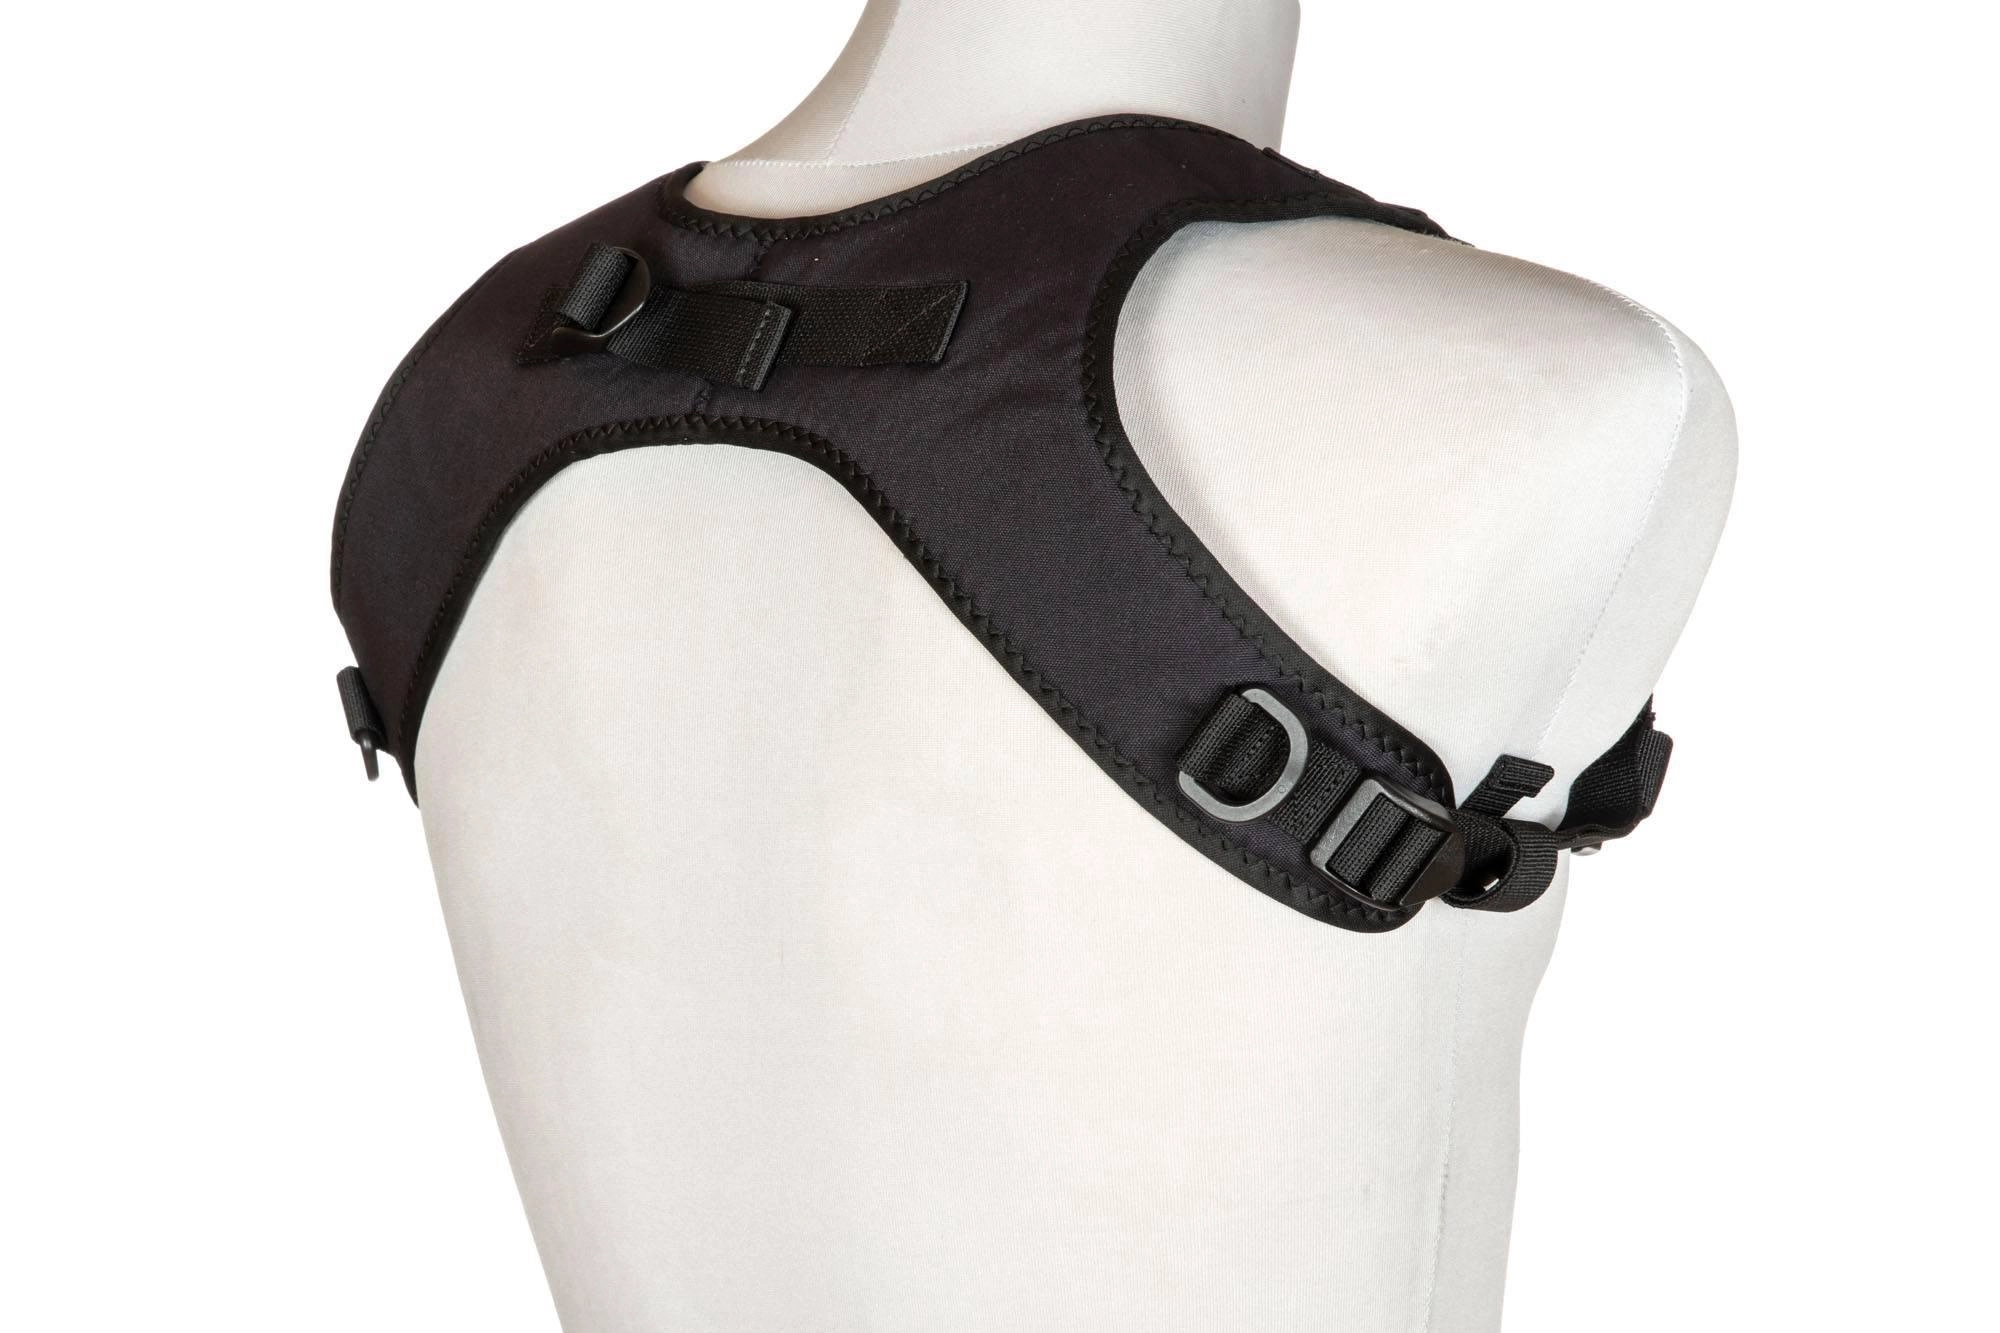 Primal Gear Tacotherium Bungee Sling Harness - musta